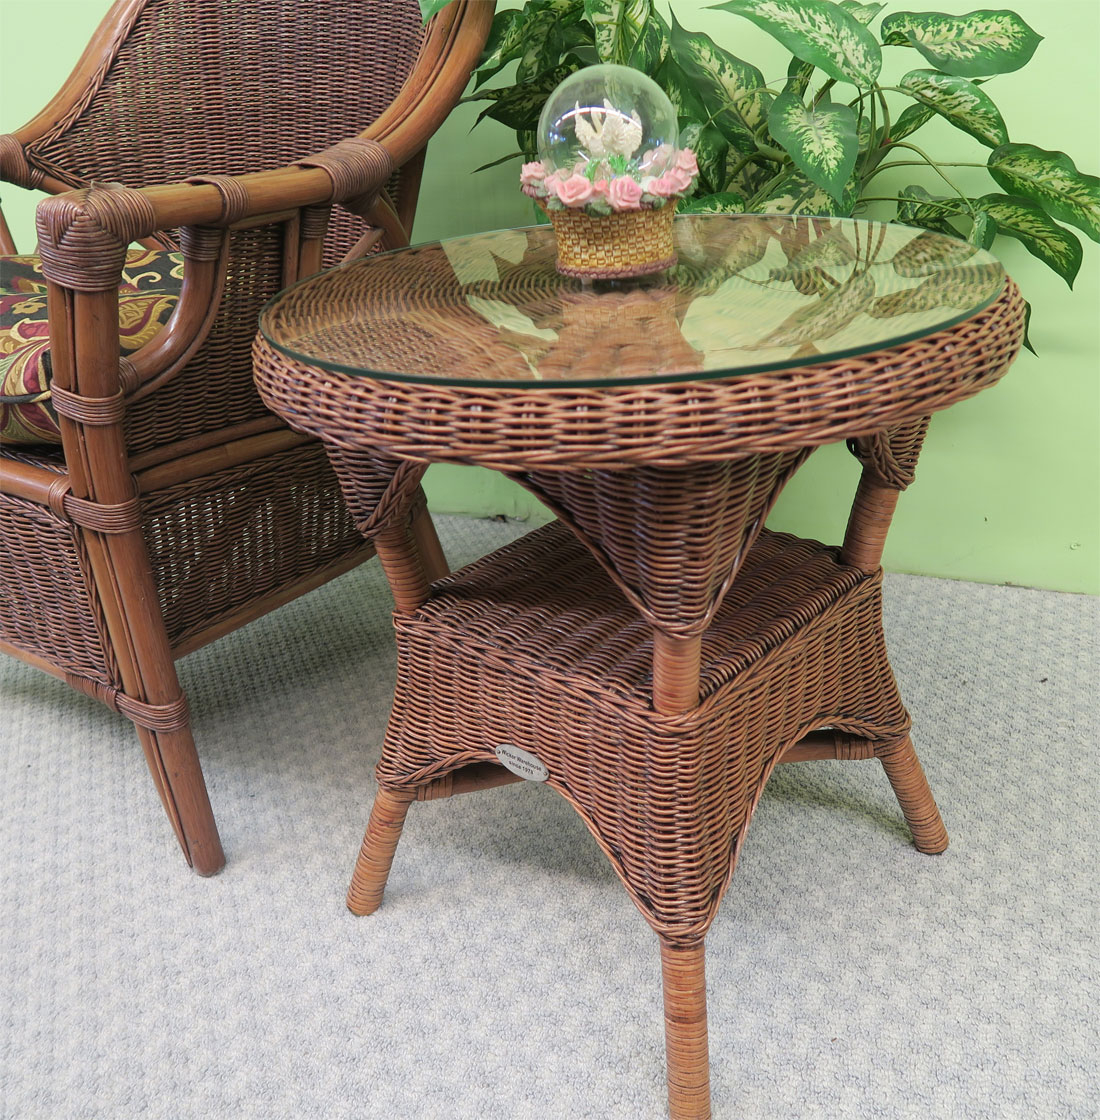  Round Wicker End Table with Glass Top  